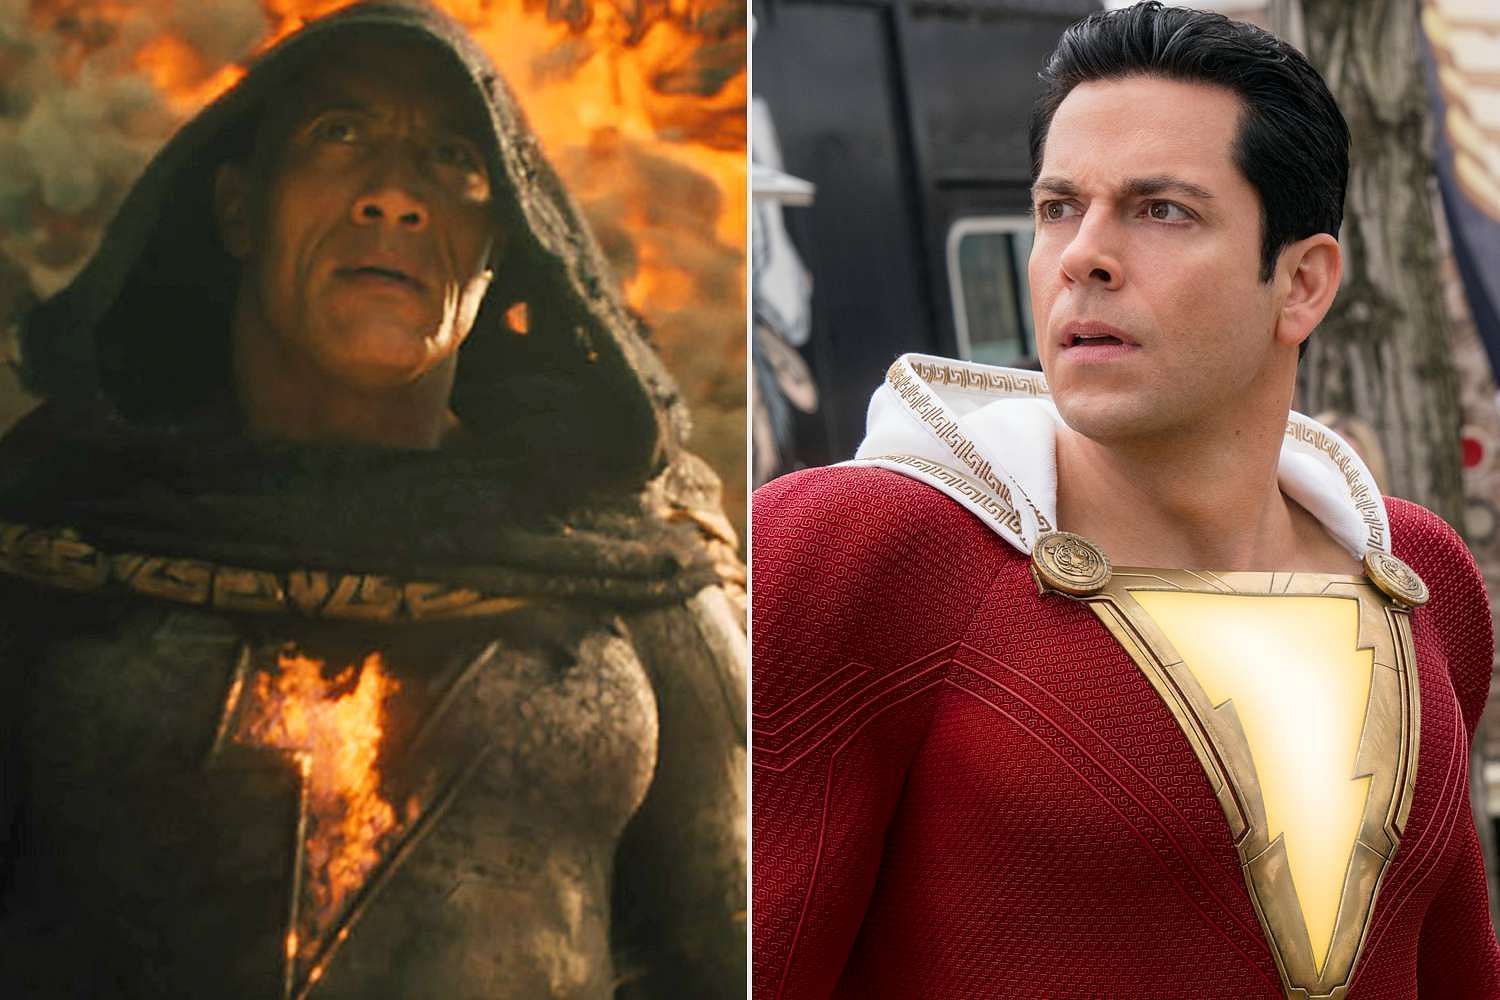 Does Shazam 2 have a post-credits scene? - Dexerto